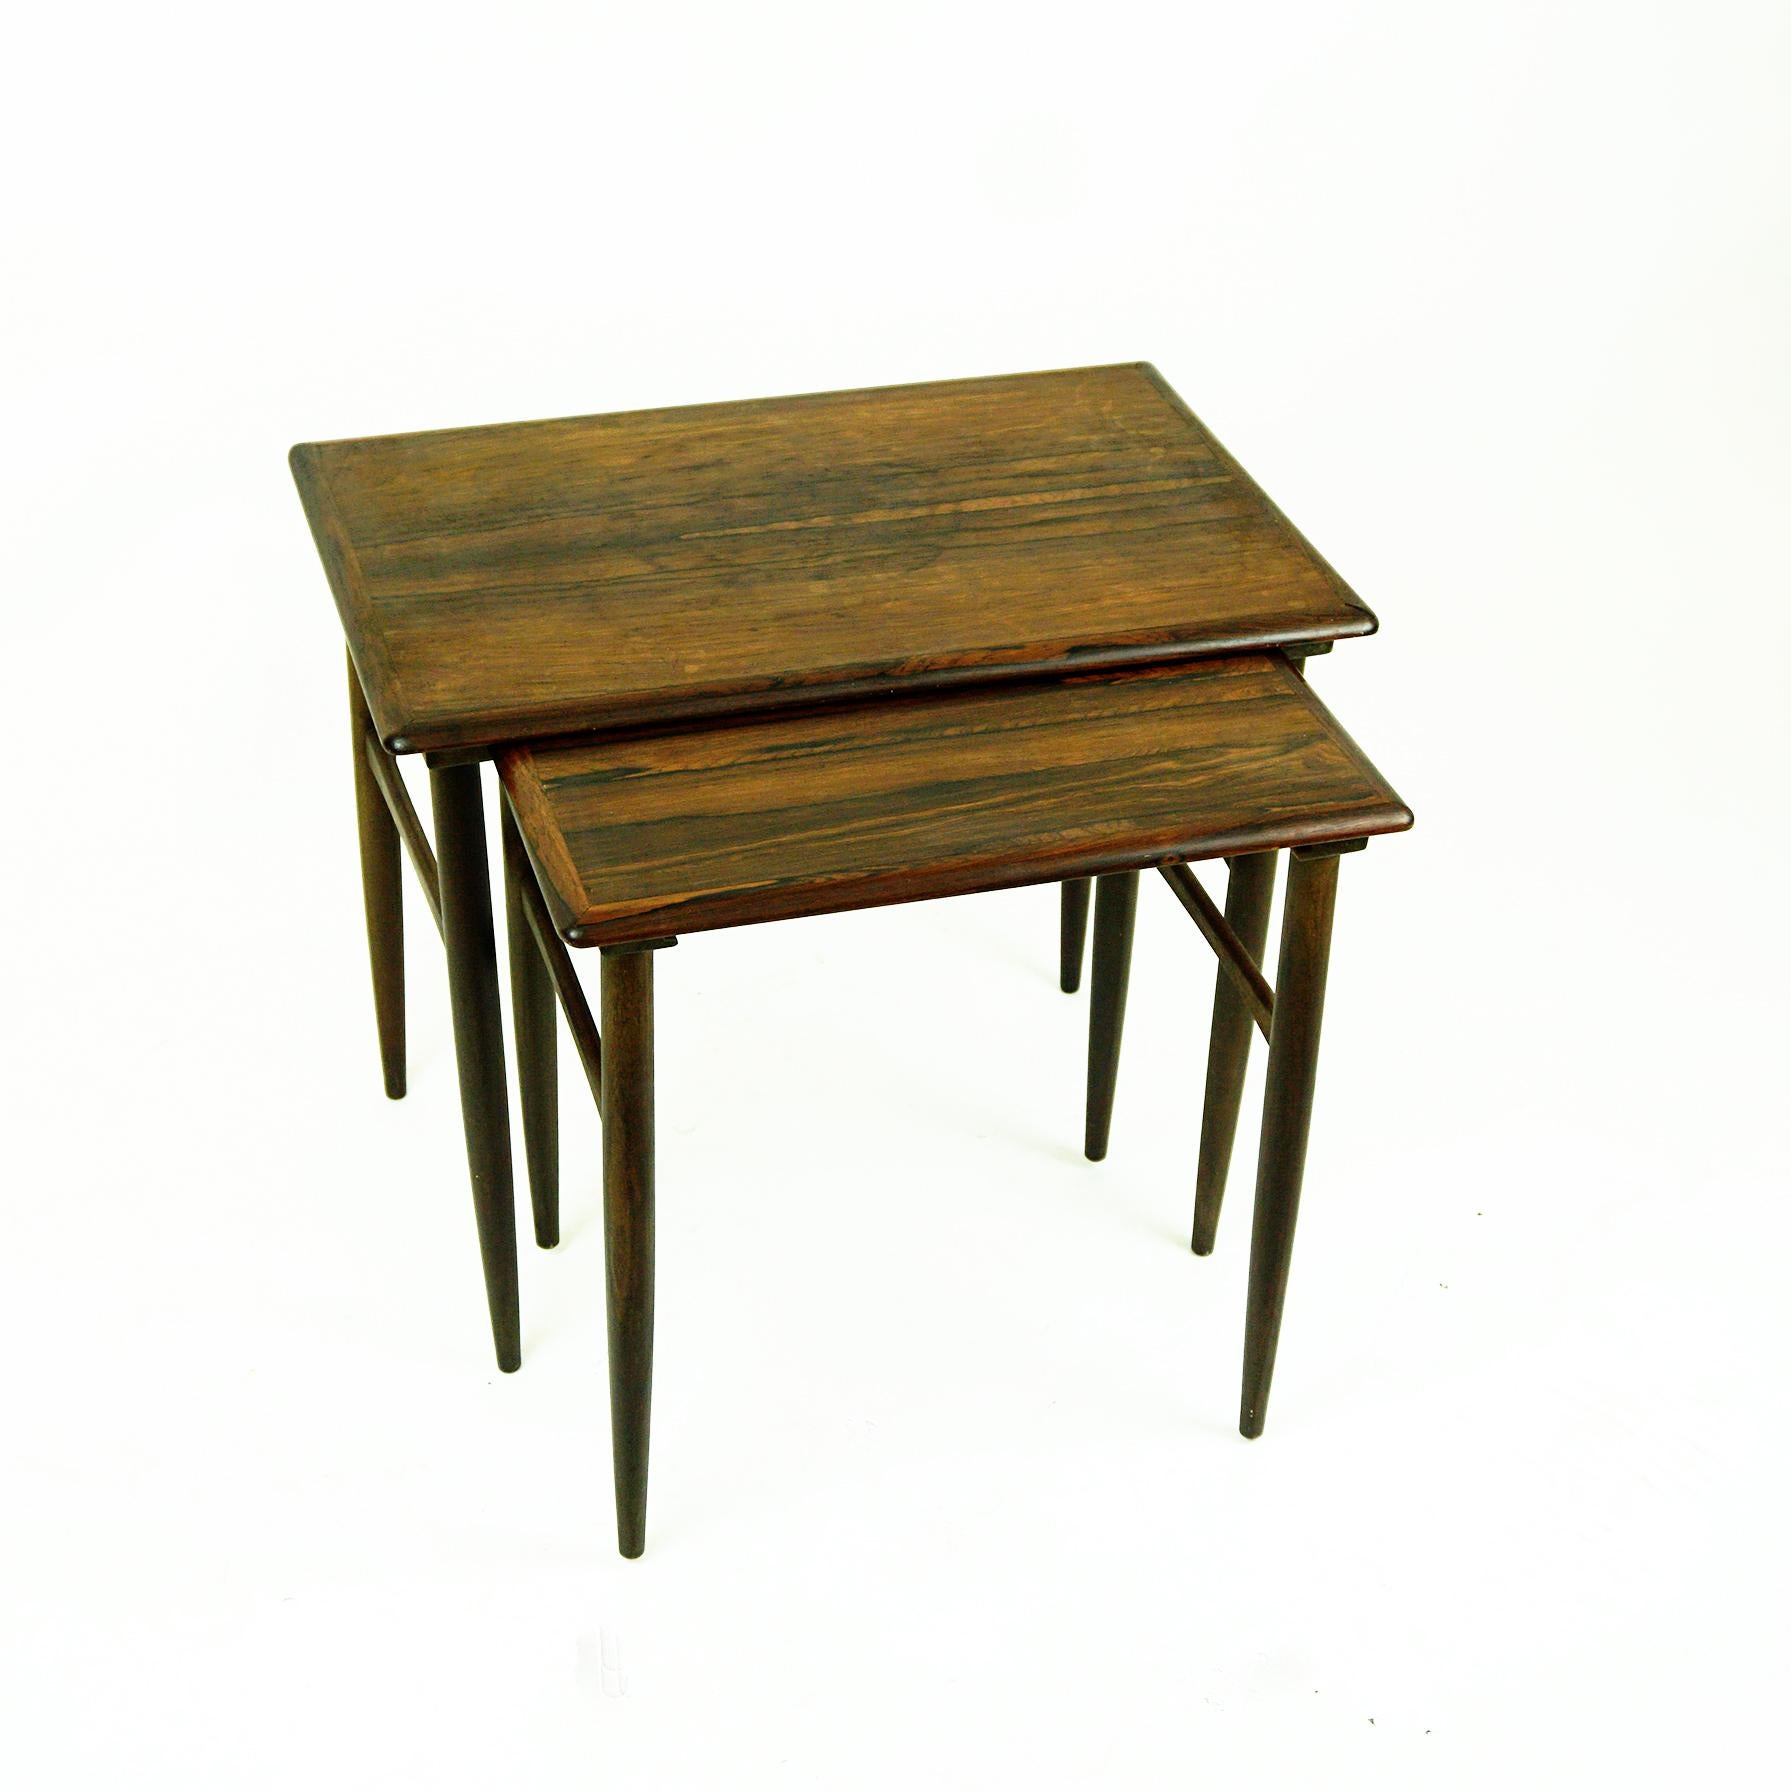 Mid-20th Century Scandinavian Modern Rosewood Nesting Tables by Poul Hundevad Denmark For Sale